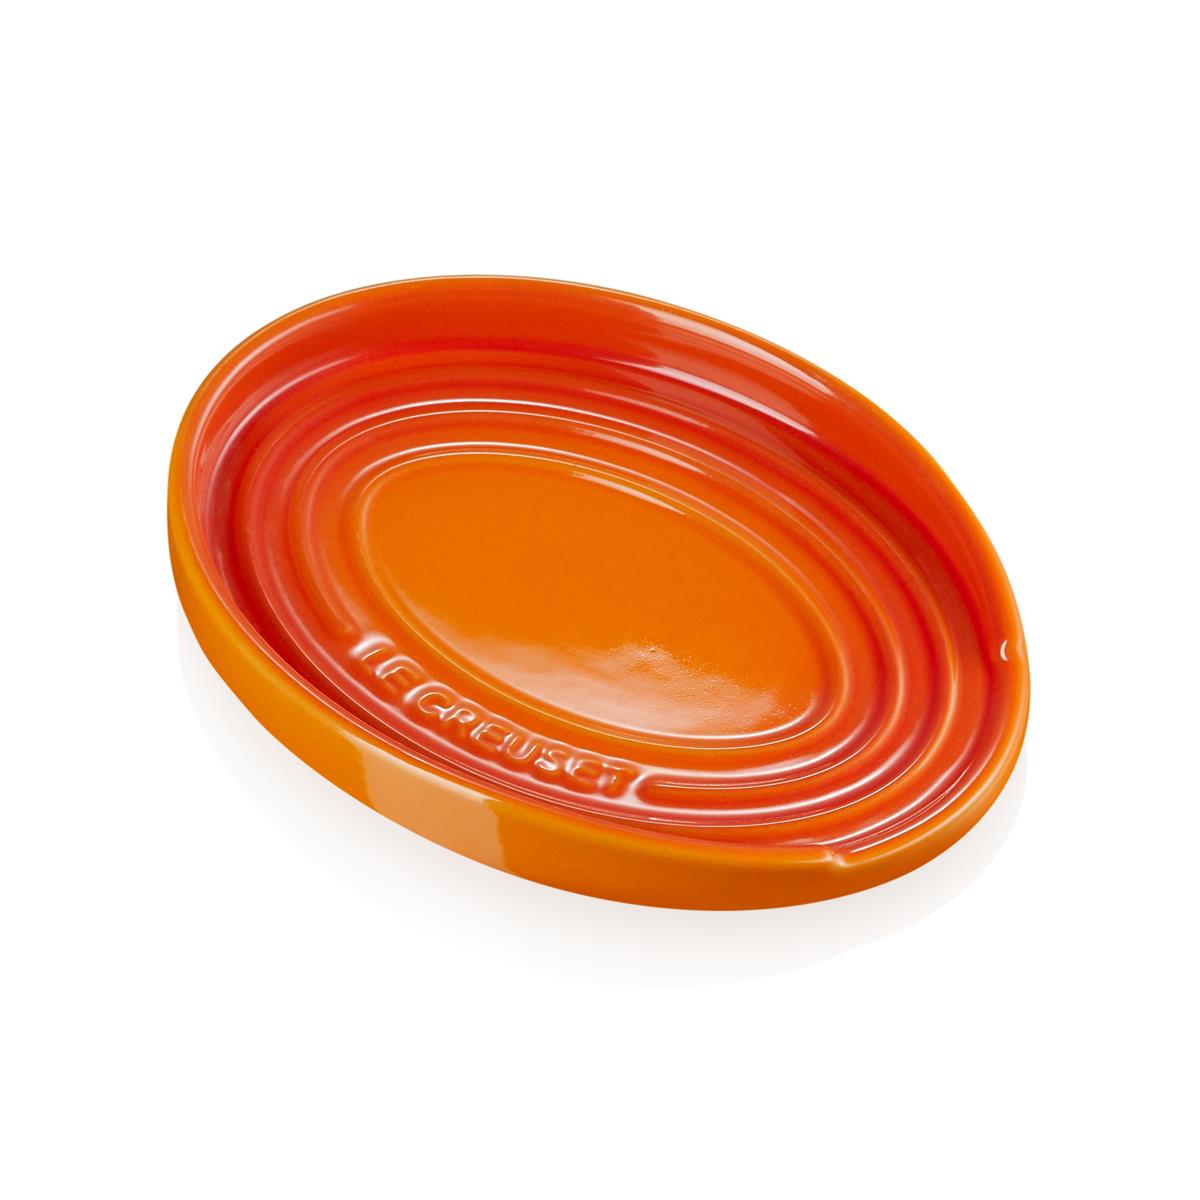 What is the warranty duration for the Le Creuset Spoon Rest?